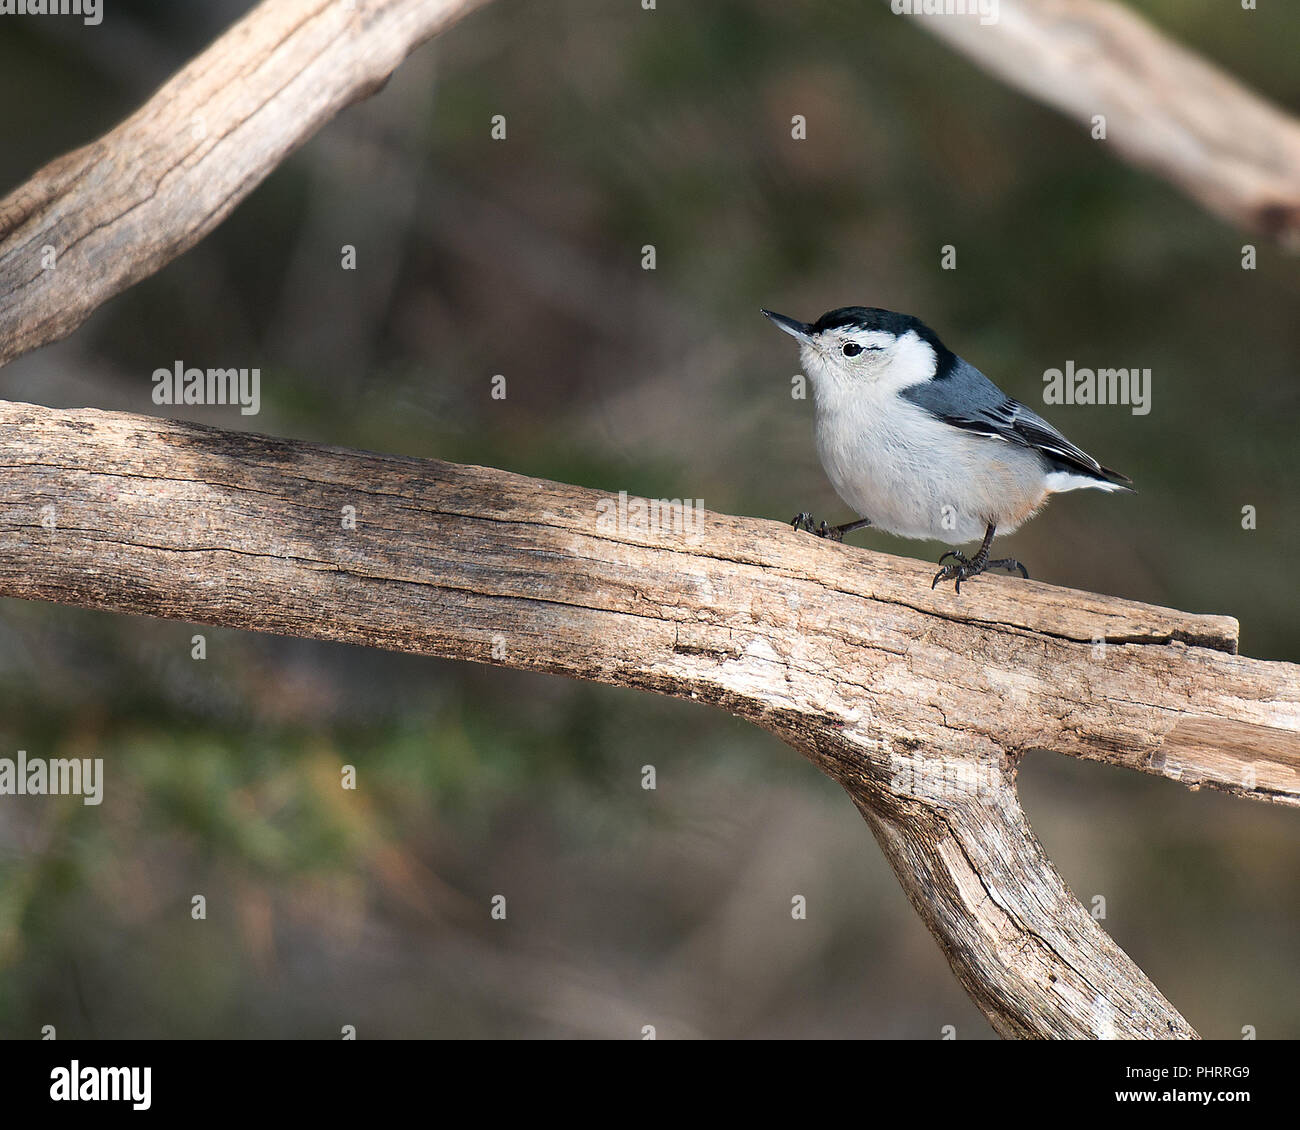 White-Breasted Nuthatch bird perch on a branch in its surrounding. Stock Photo